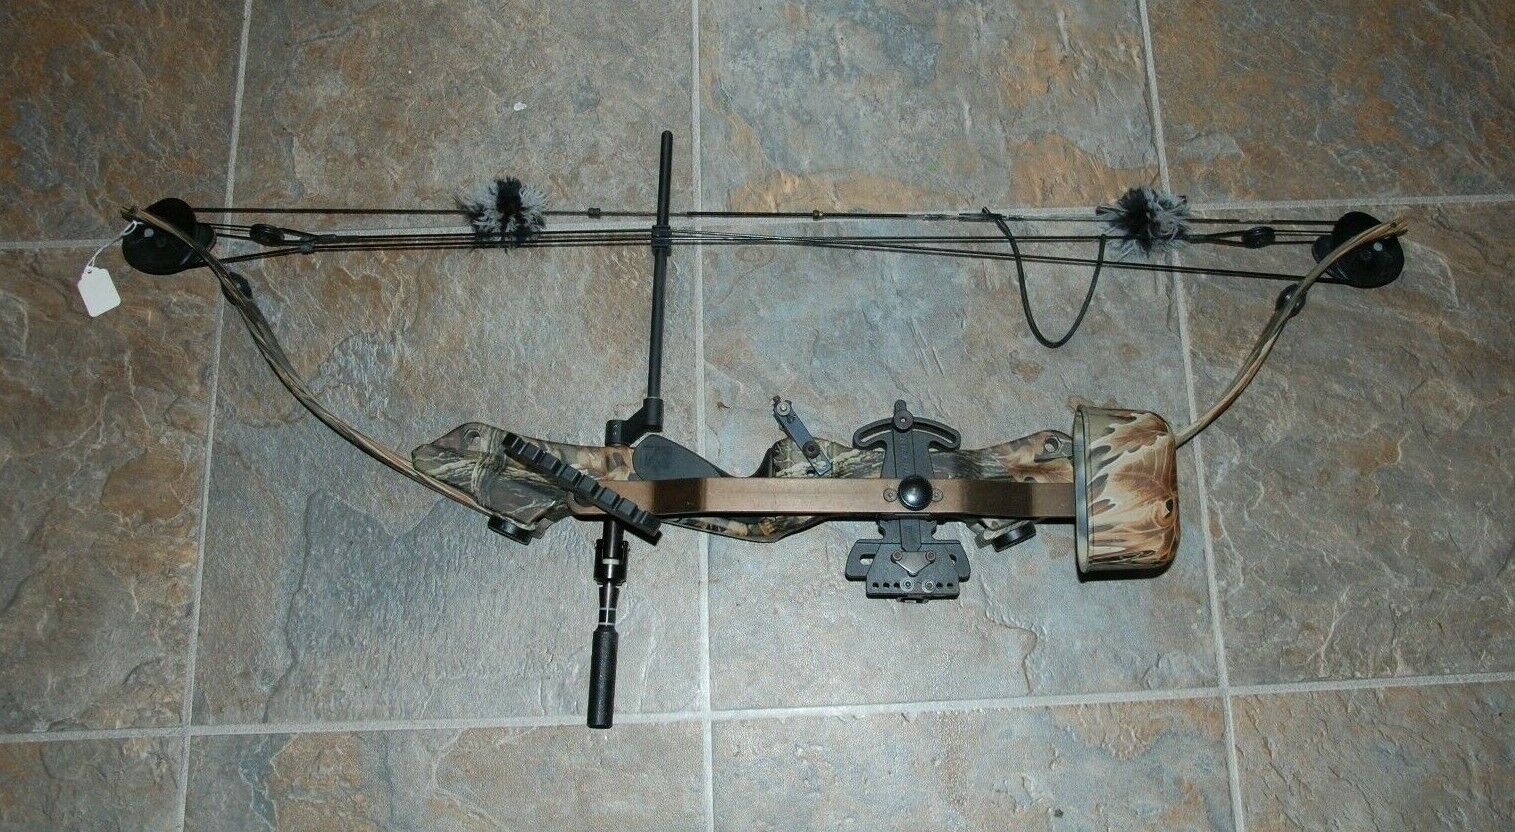 Golden Eagle Compound Archery Bow Hawk System Hunting Target 55-70